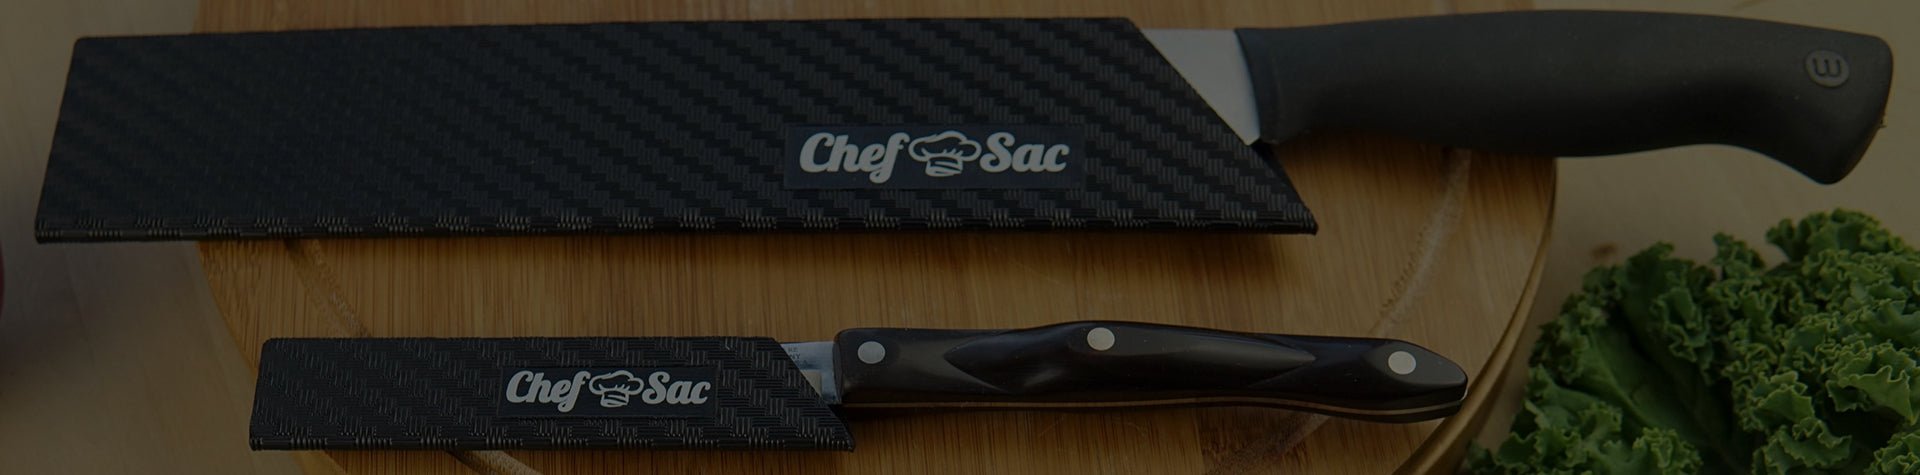 Chef Sac Knife Edge Guards | Universal Knife Cover & Professional Knife  Protector | Durable BPA-Free ABS Plastic Knife Guards | Gentle Non-Scratch